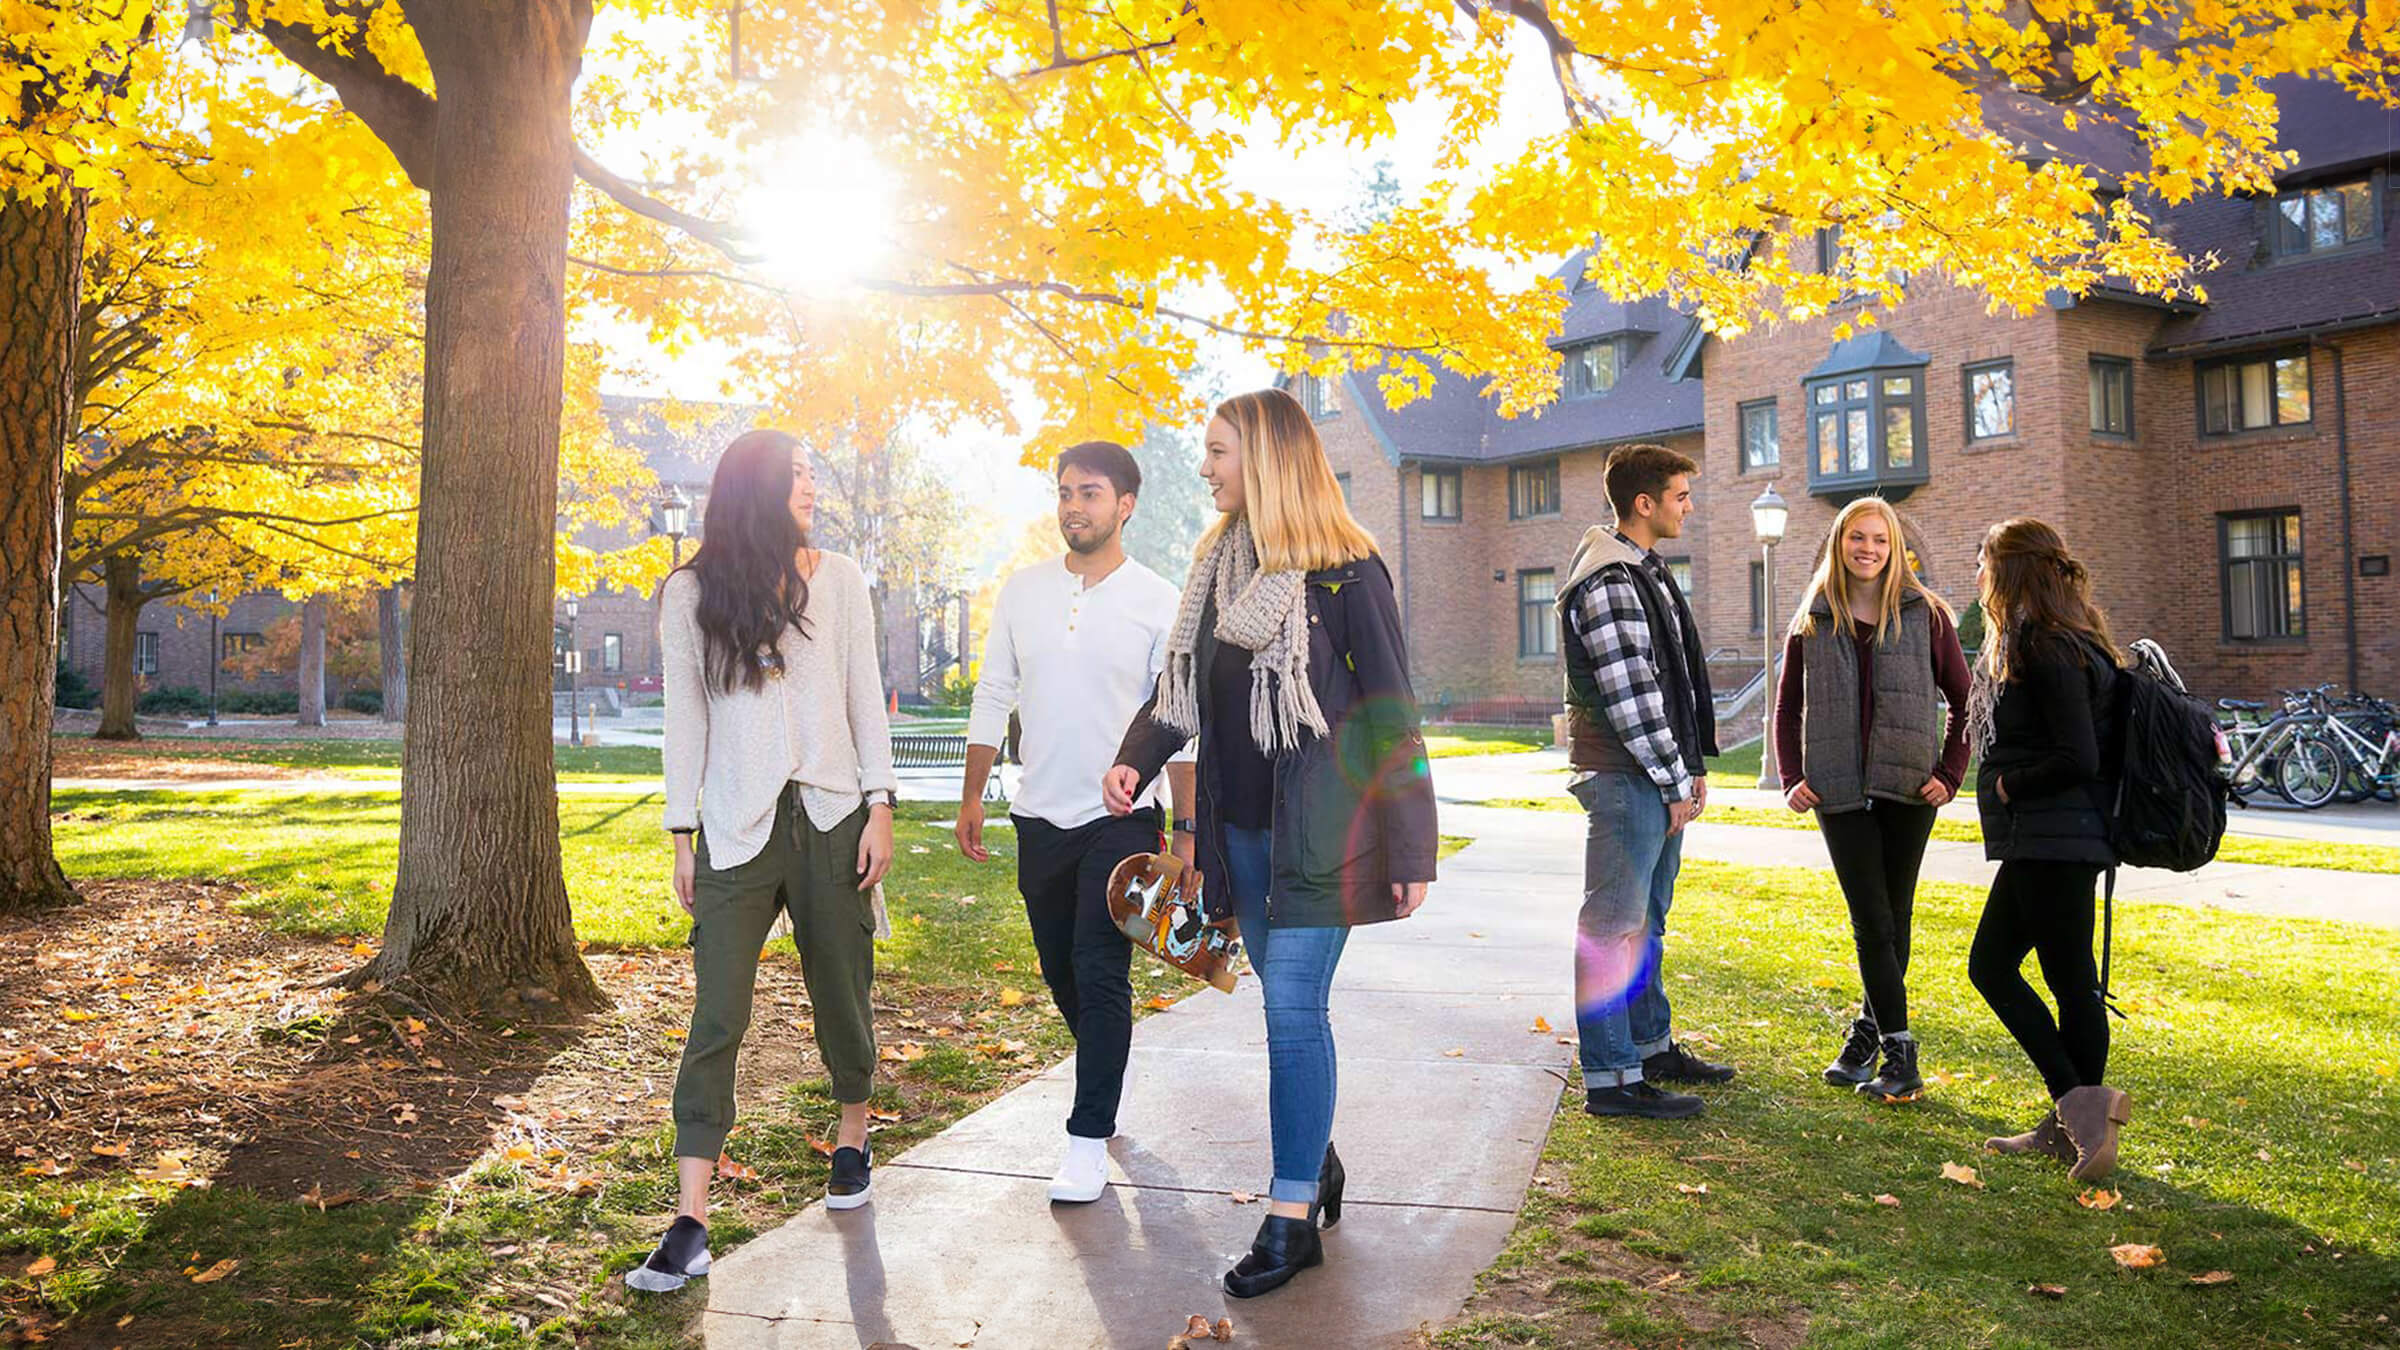 Students walk on campus, with a tree in fall colors behind them.